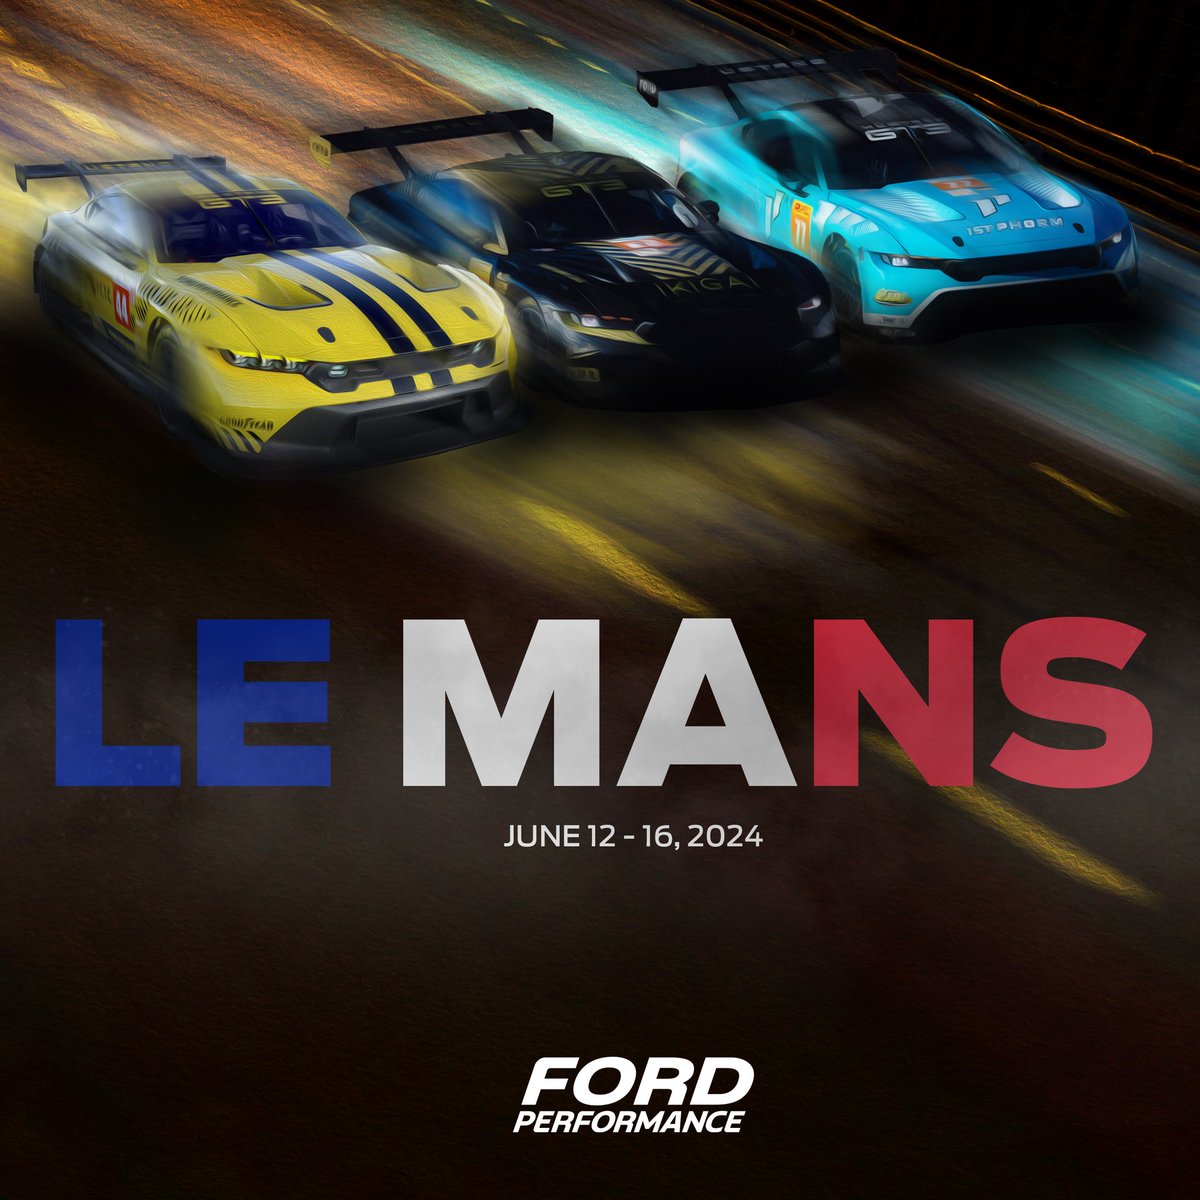 Next month, three @ProtonRacing @FordMustang GT3s will take to the stage in one of the world’s most prestigious races - the @24hoursoflemans. Stay tuned for details on how to follow along on this historic journey. 
#BredtoRaceFP #GoLikeHell #LEMANS24